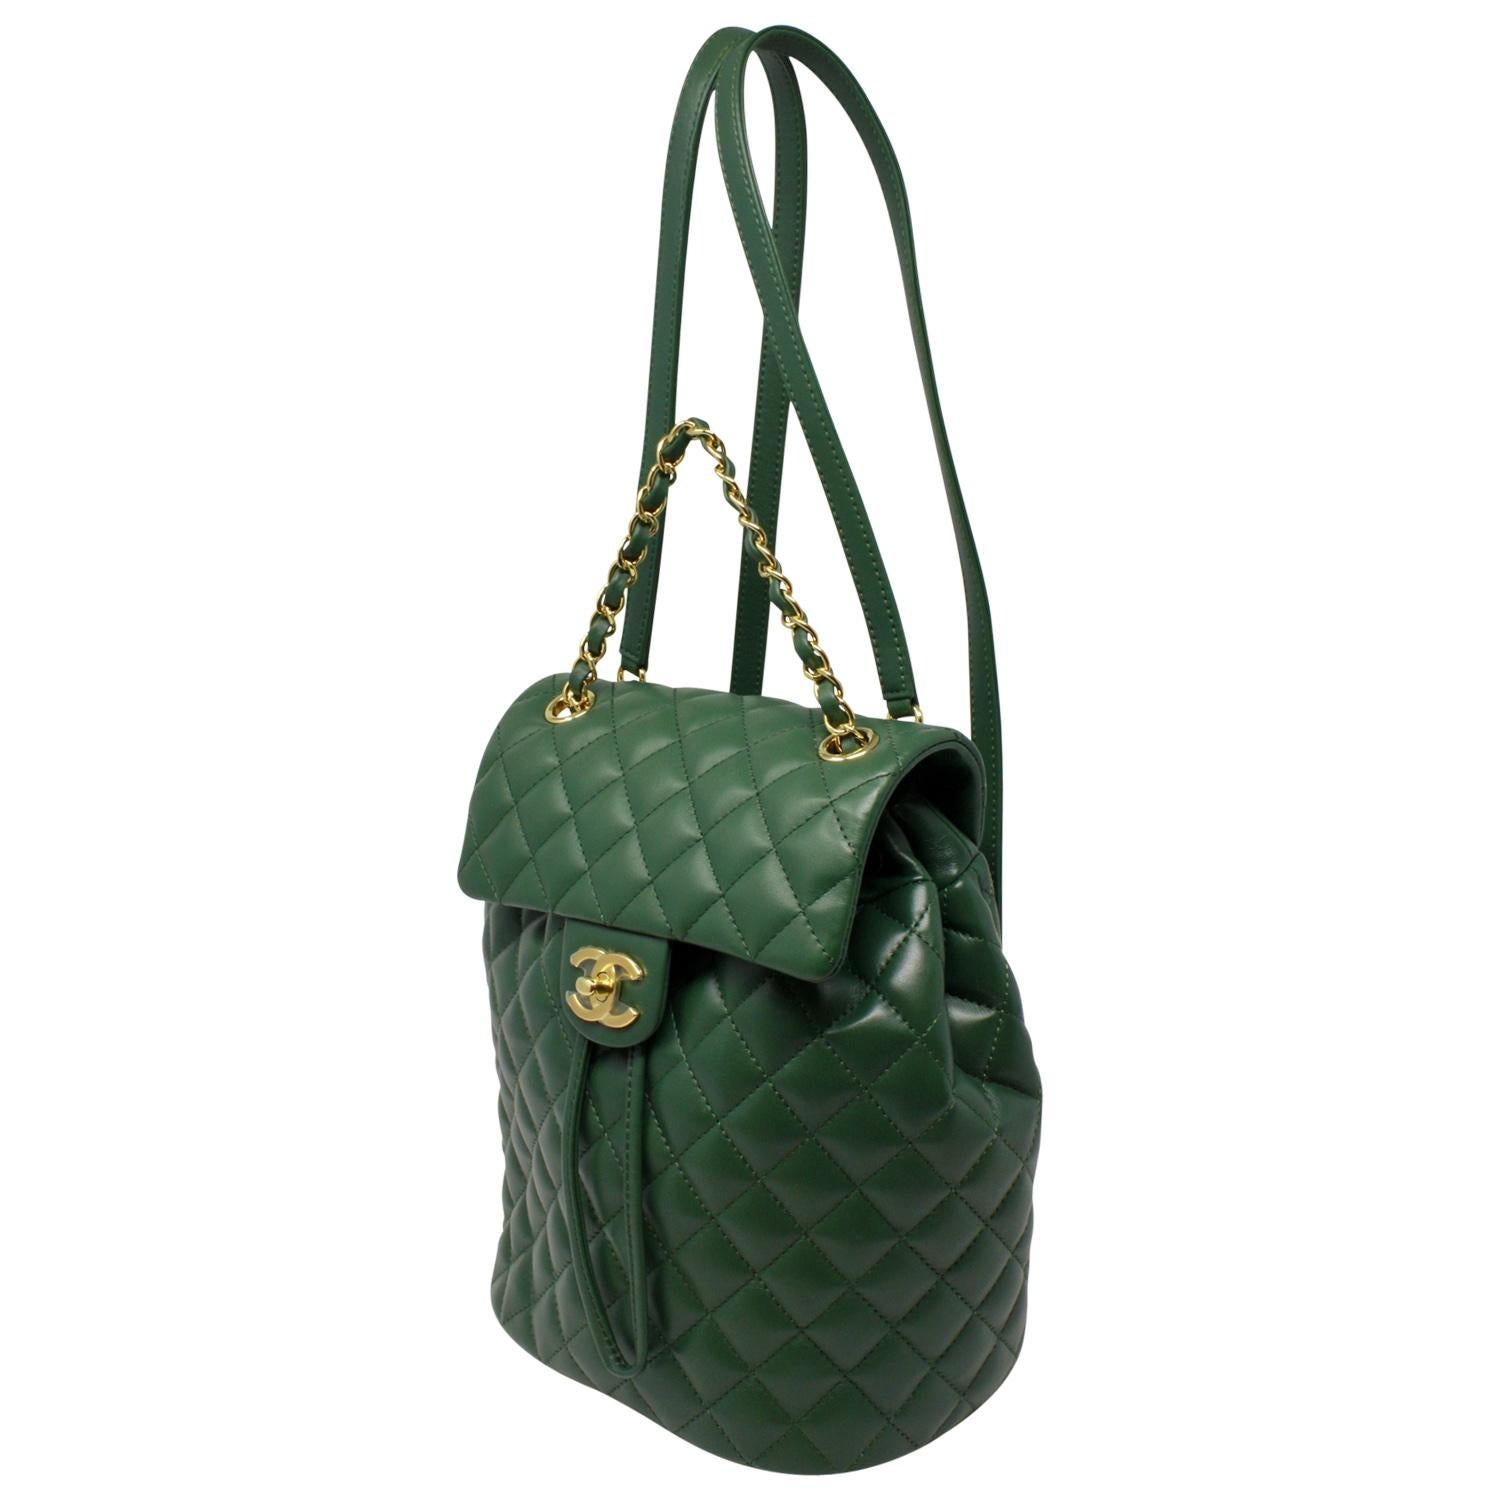 Be the first to carry this gorgeous green quilted lambskin Chanel treasure (protective plastic is STILL ON ALL THE HARDWARE!) She is the most perfect size for a backpack where you can fit your essentials but does not feel like you are going to